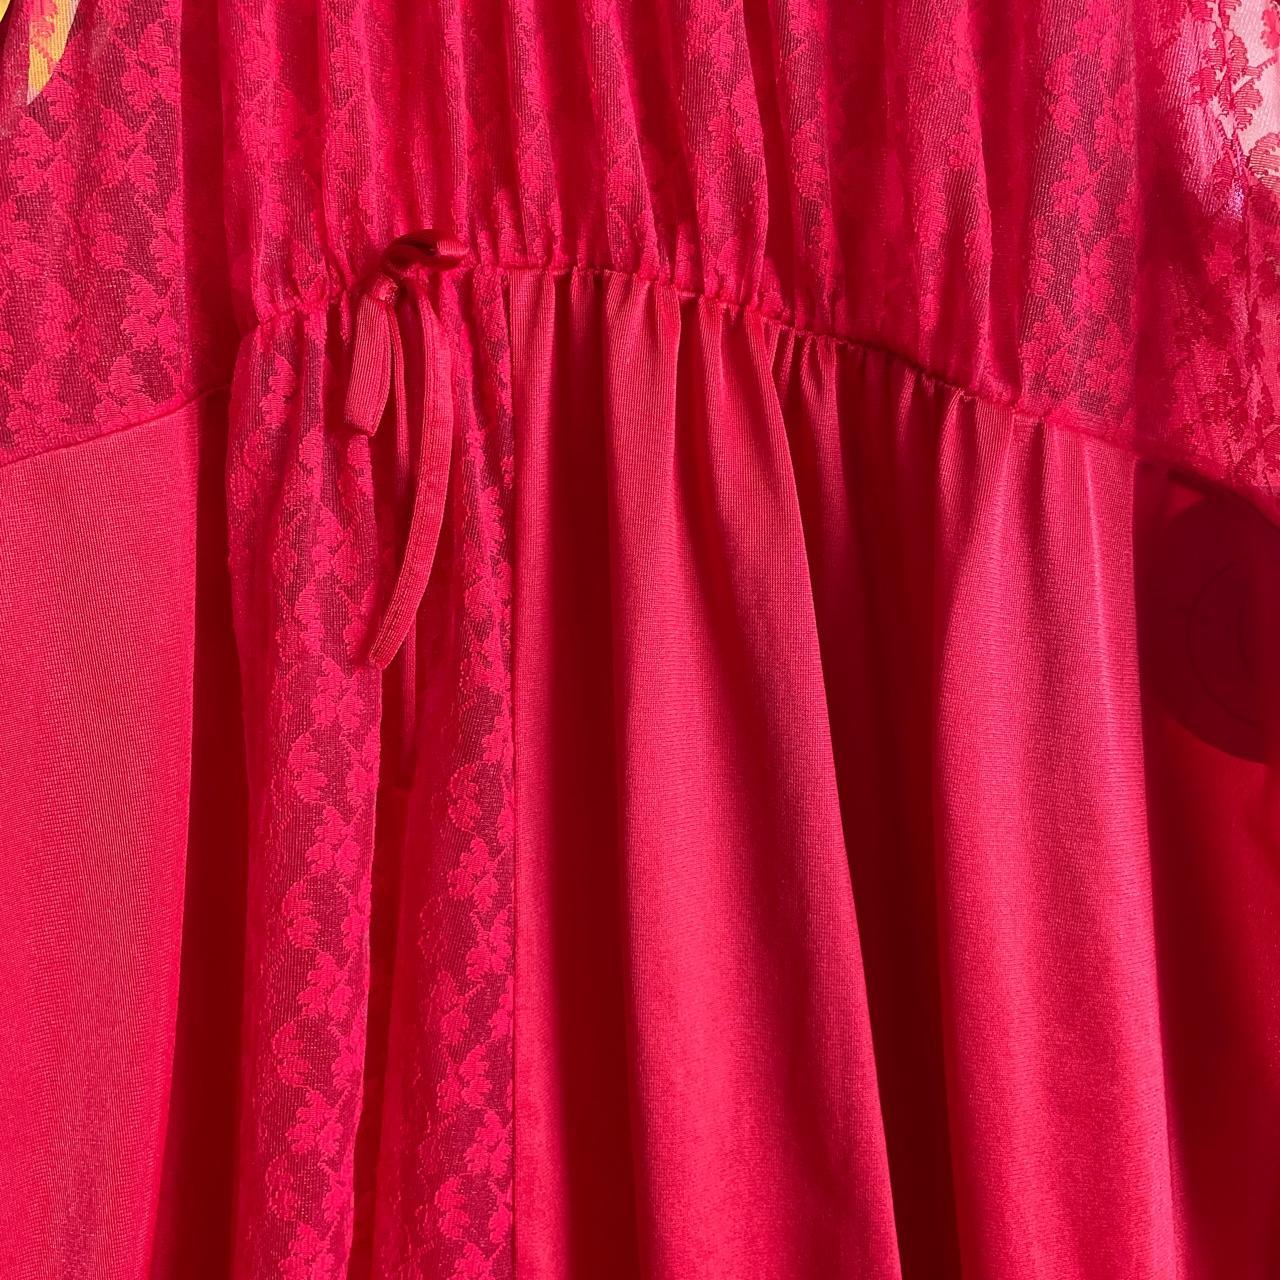 Vintage 70s Red Lace Nightgown | Shop THRILLING